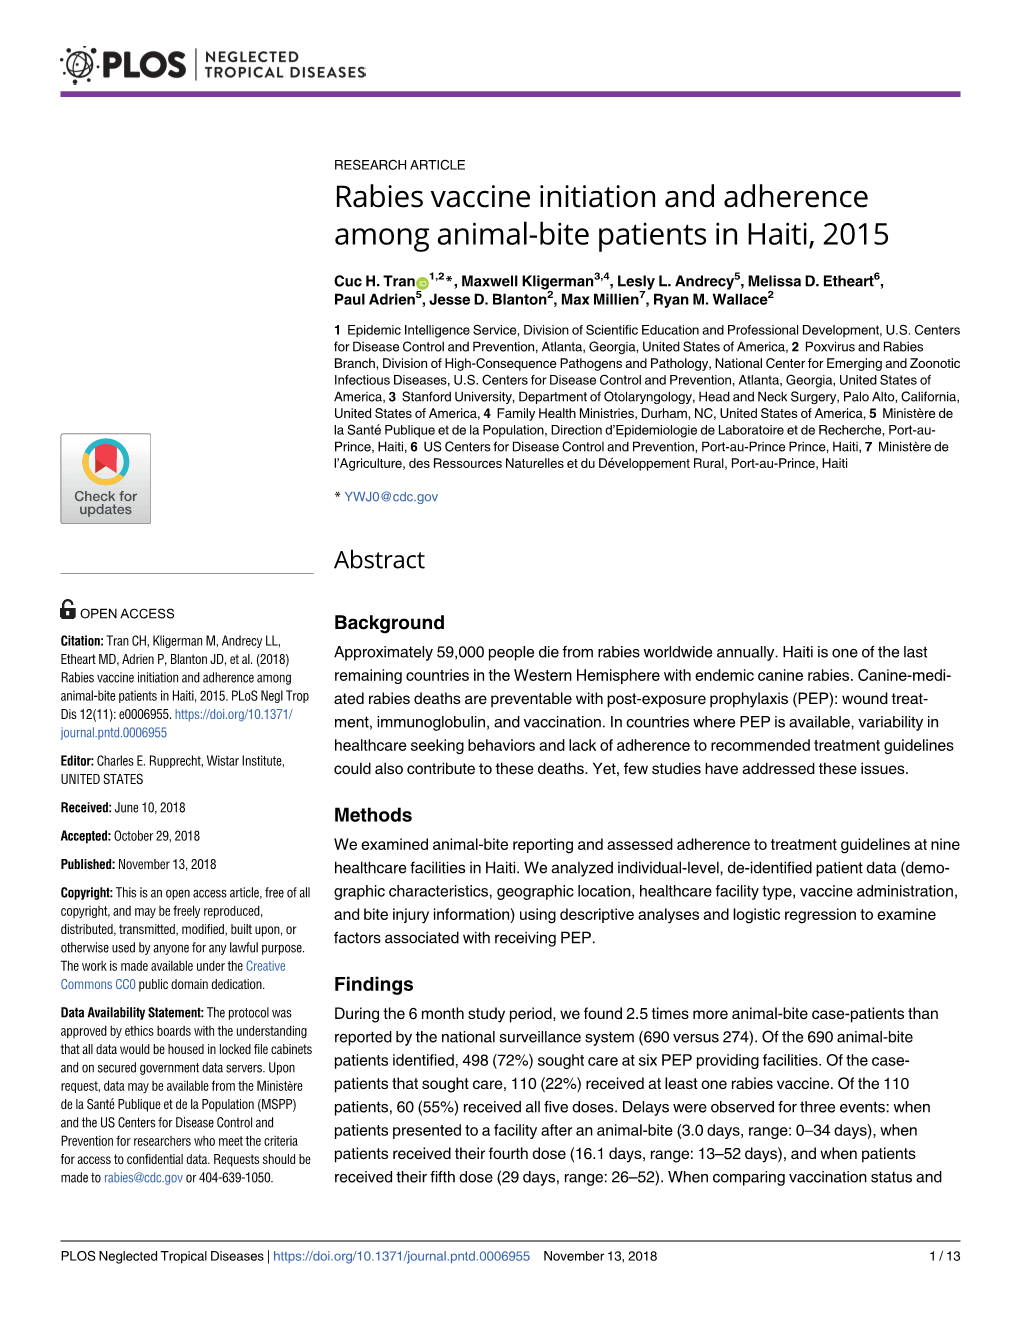 Rabies Vaccine Initiation and Adherence Among Animal-Bite Patients in Haiti, 2015